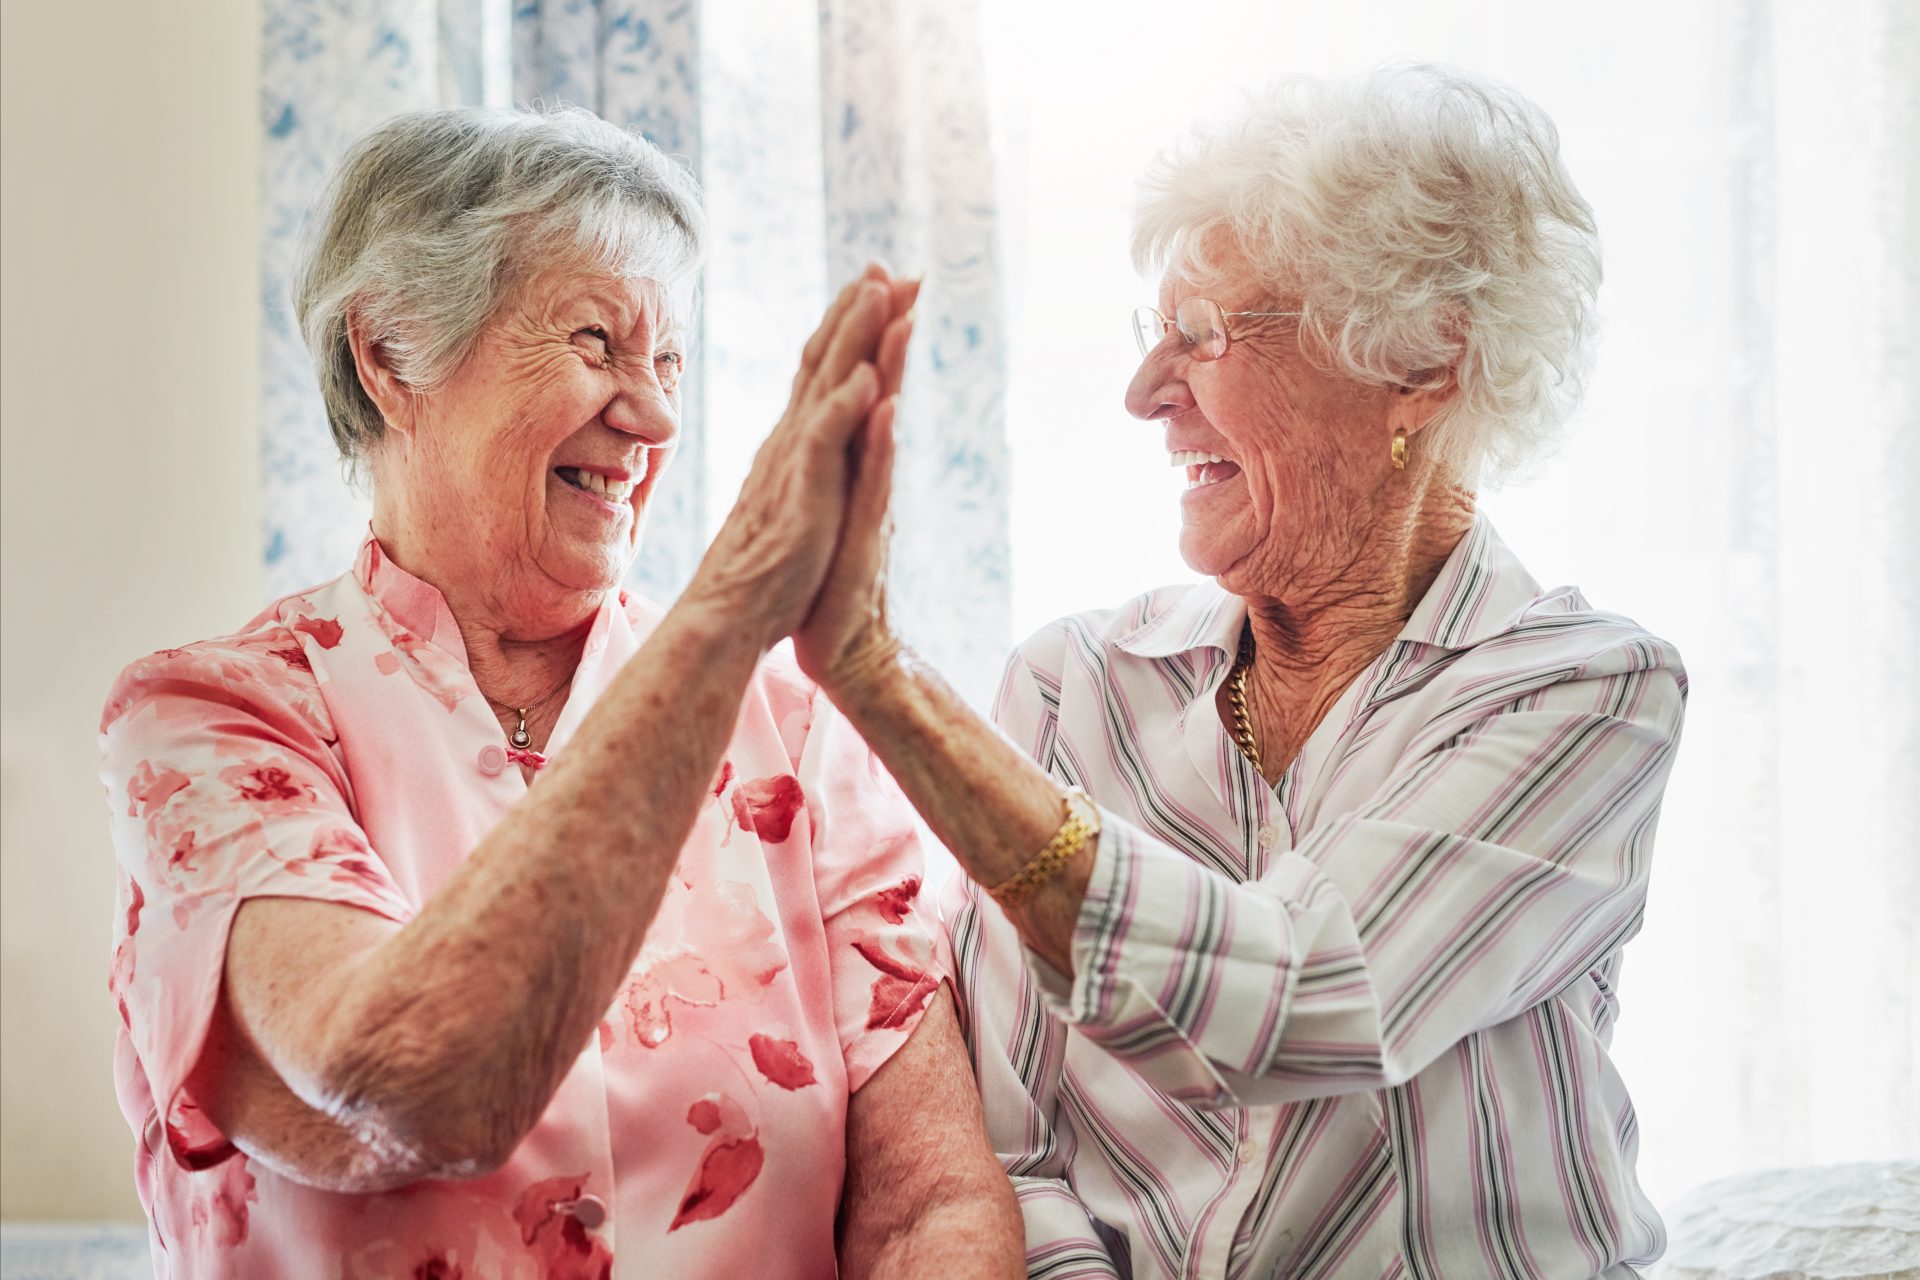 Two elderly women sharing a joyful high-five in a well-lit living room with floral curtains.